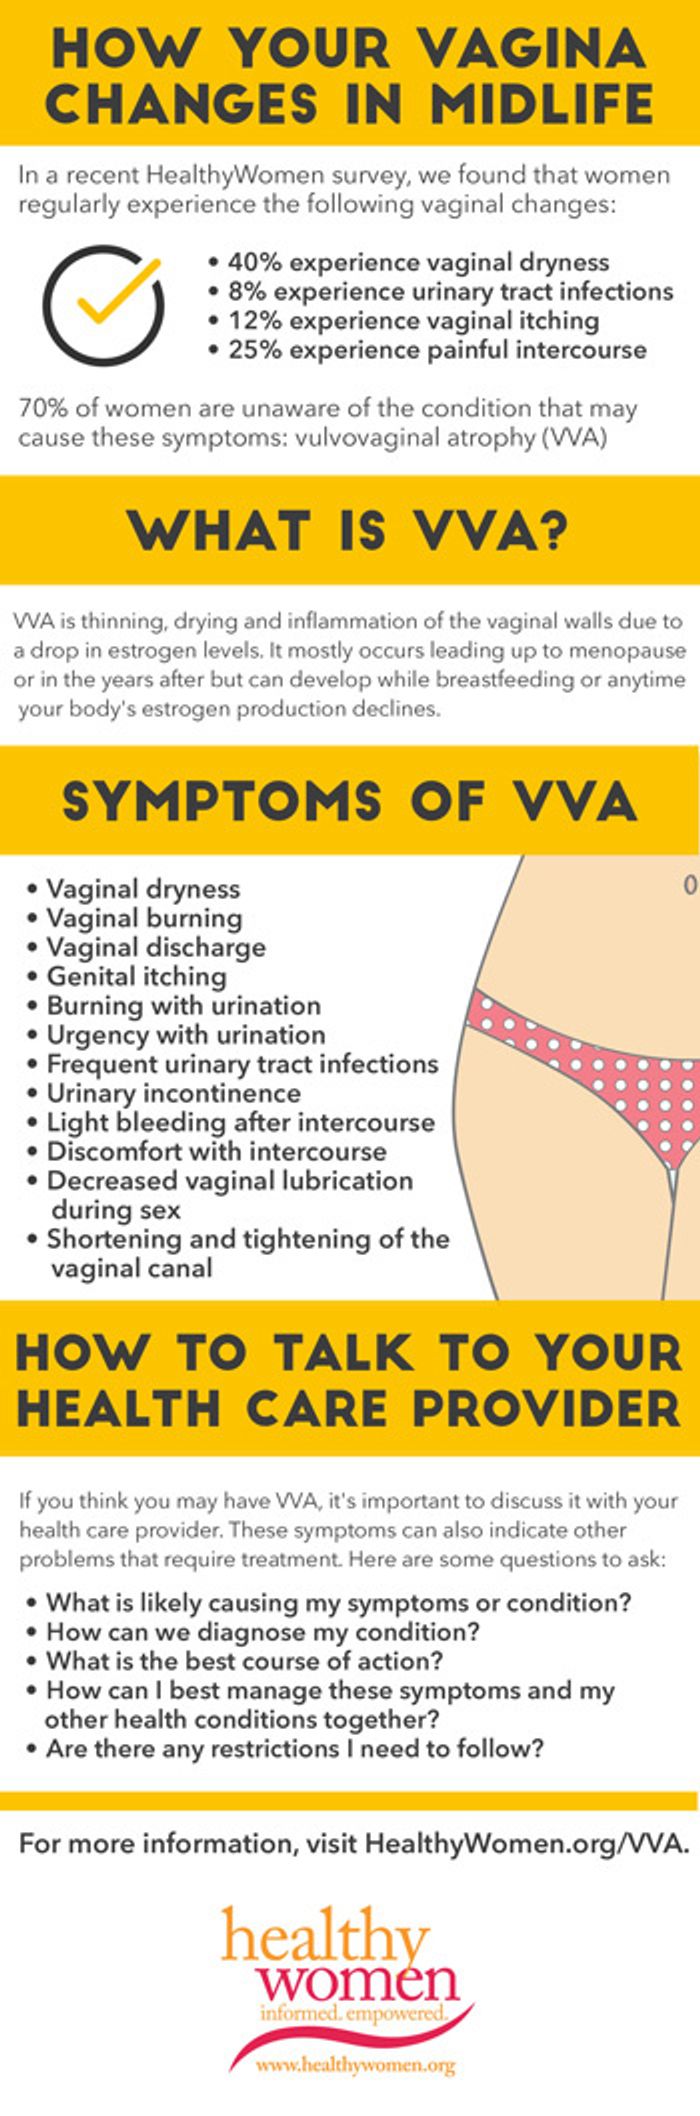 How Your Vagina Changes in Midlife - HealthyWomen